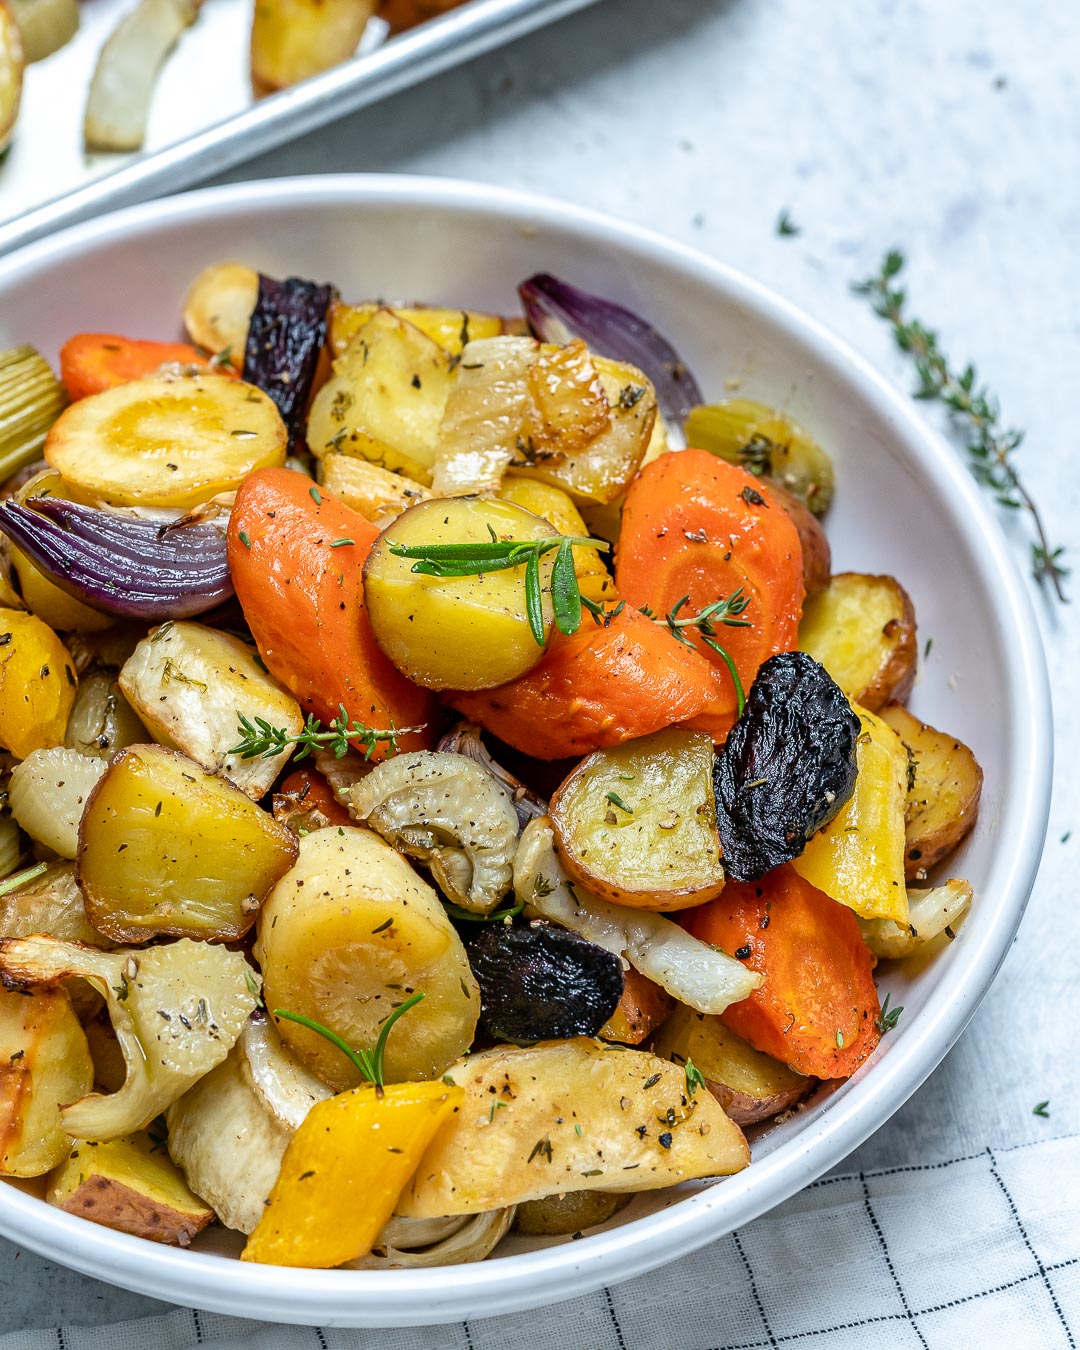 https://cleanfoodcrush.com/wp-content/uploads/2020/02/Clean-Eating-Rosemary-Roasted-Root-Vegetables.jpg